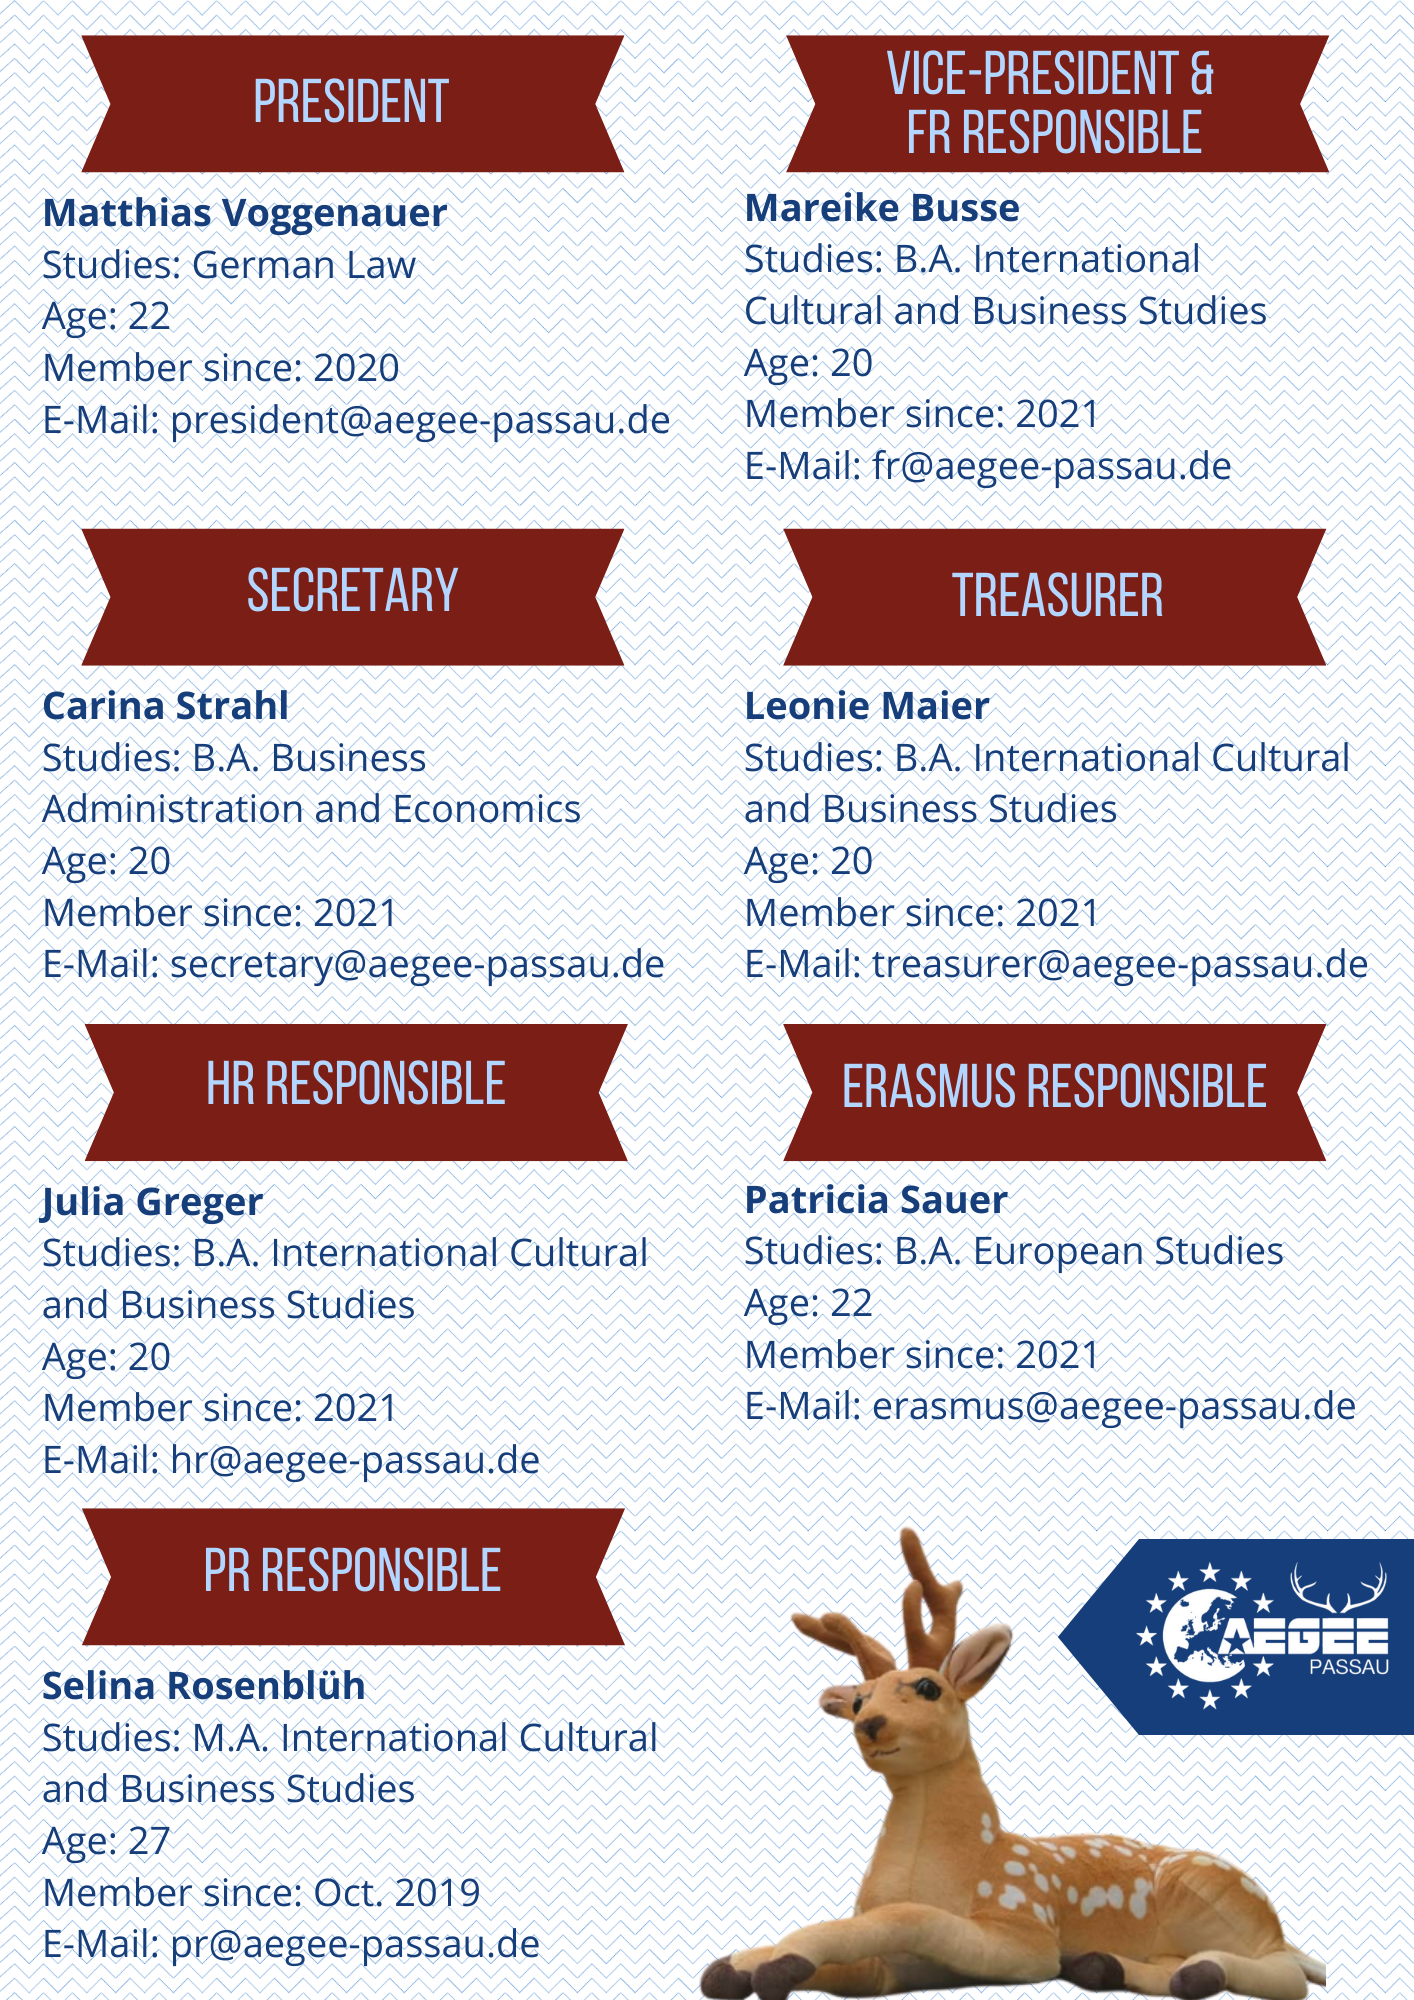 Meet the new board of AEGEE-Passau